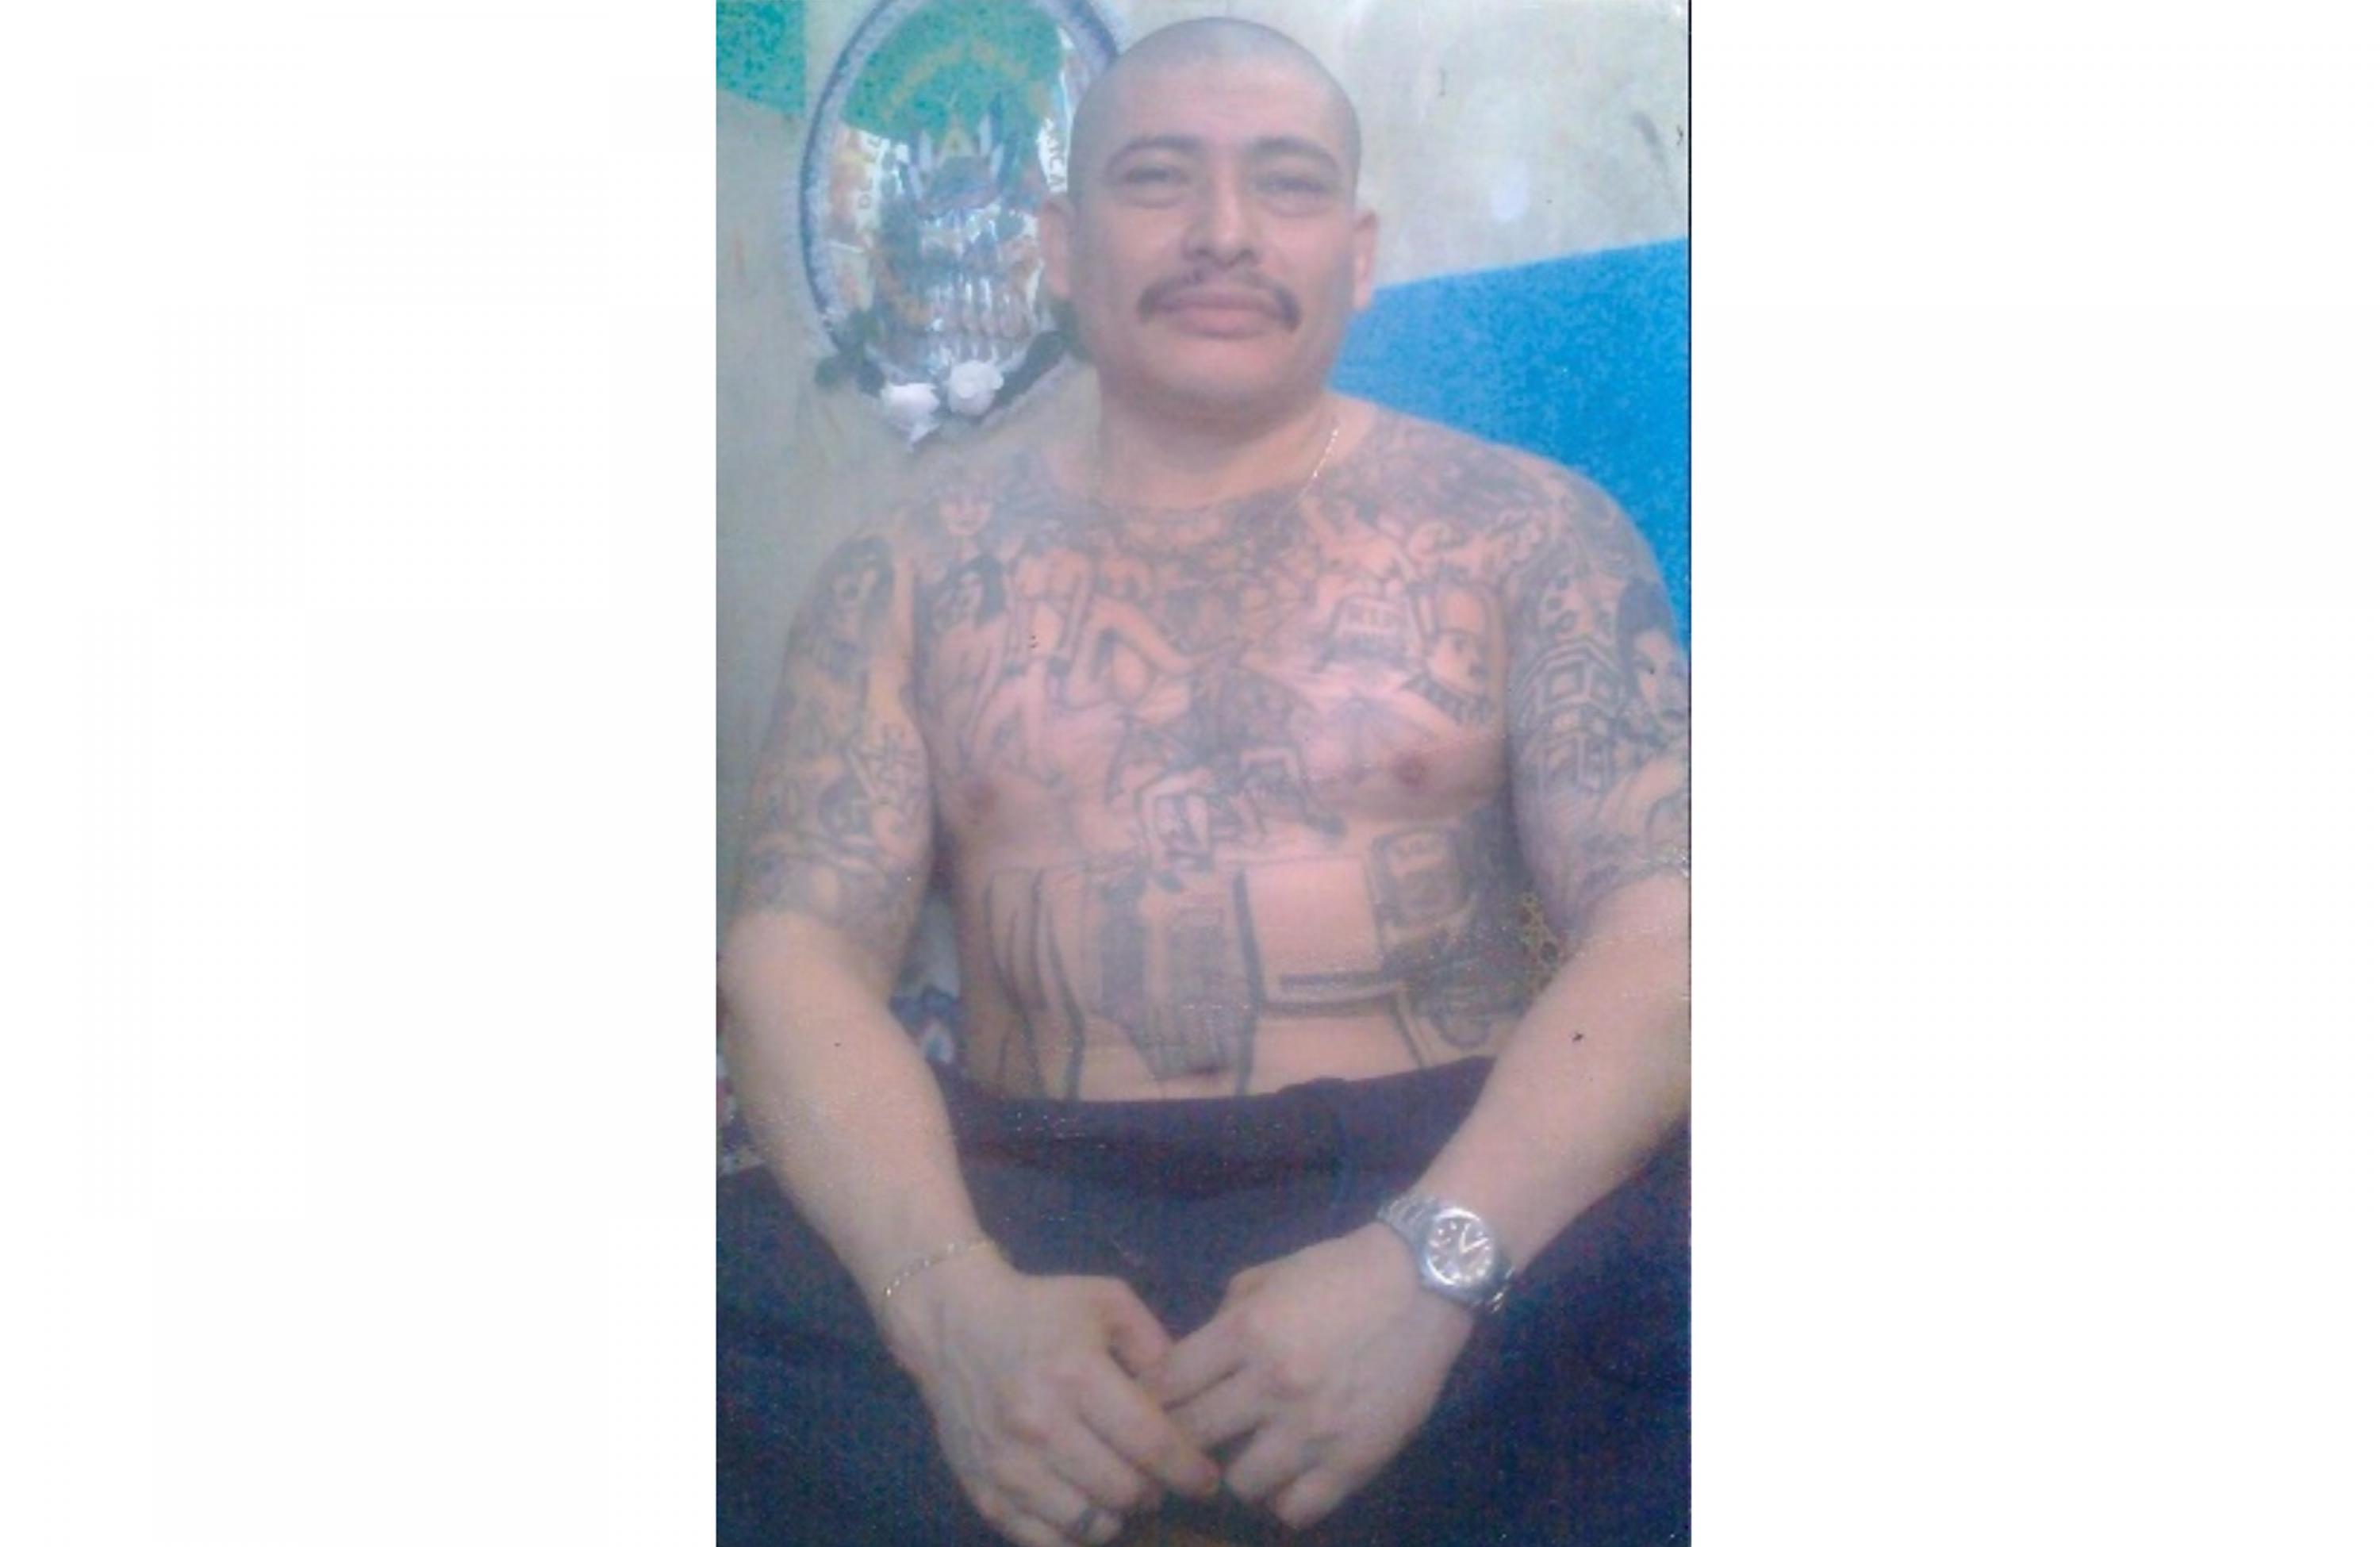 Photograph of Crook obtained from a Salvadoran police intelligence file released through the Guacamaya Leaks.